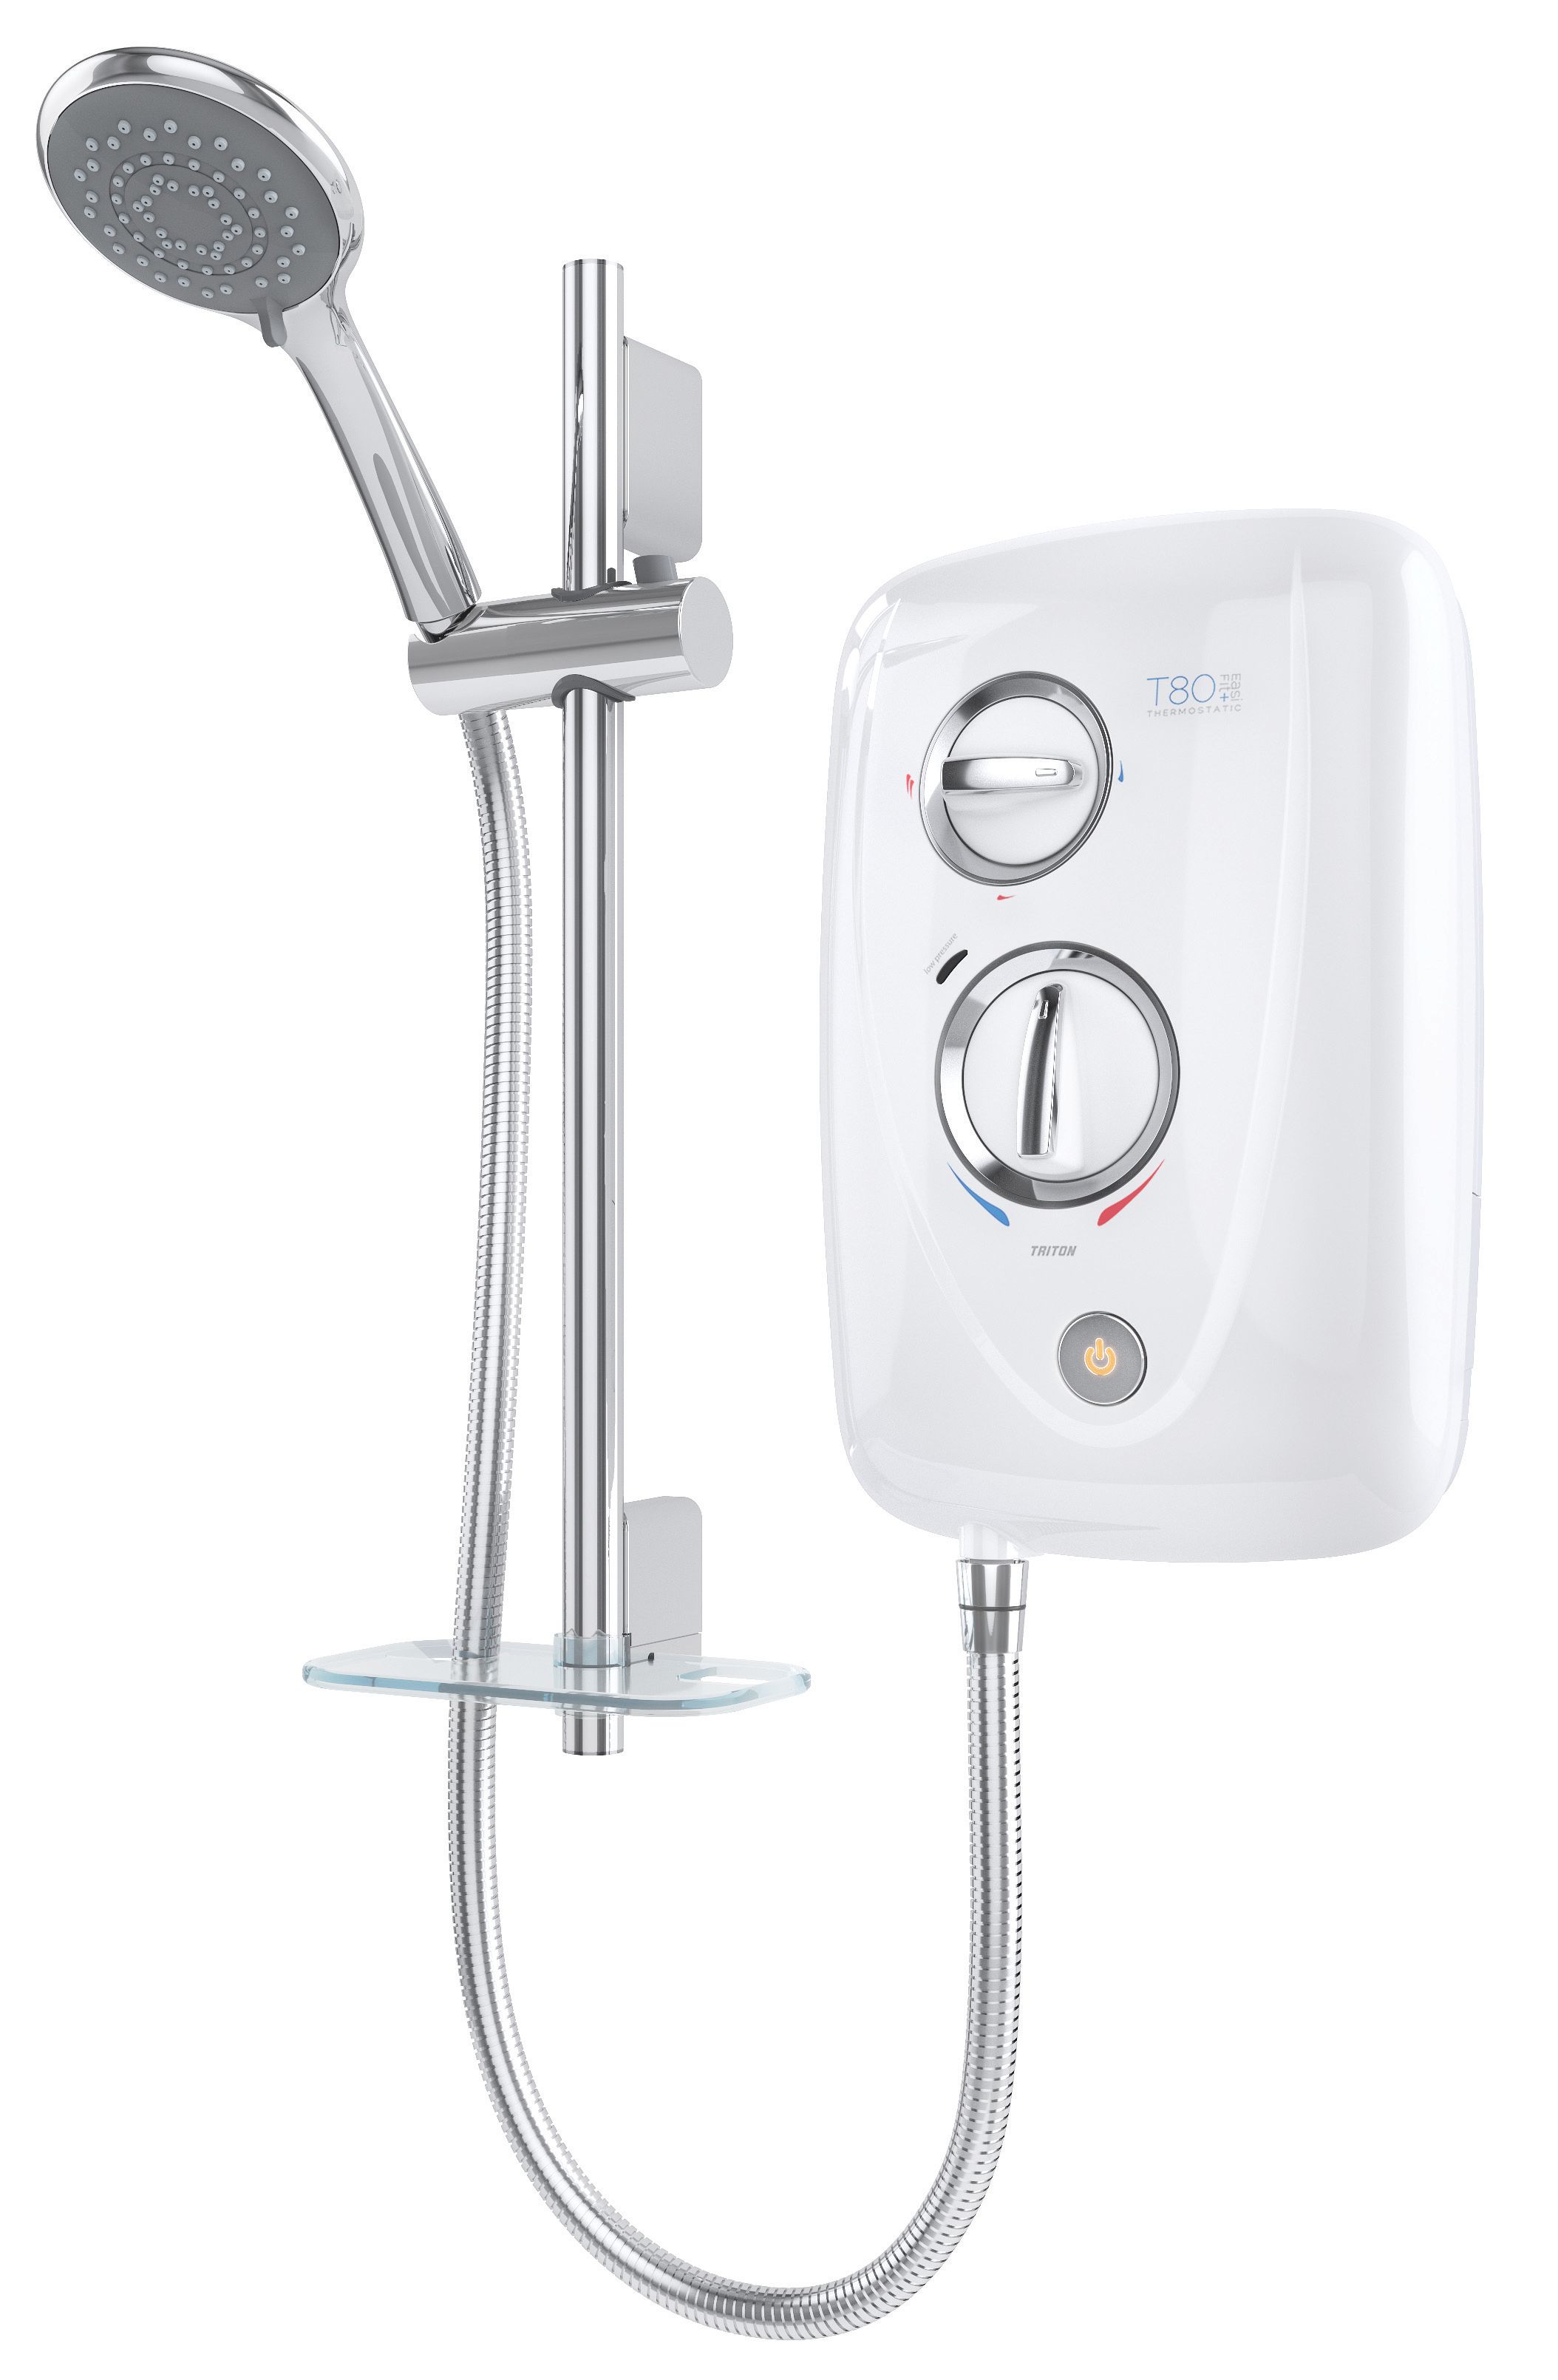 Image of Triton T80 Easi-fit+ Thermo 9.5kW Electric Shower